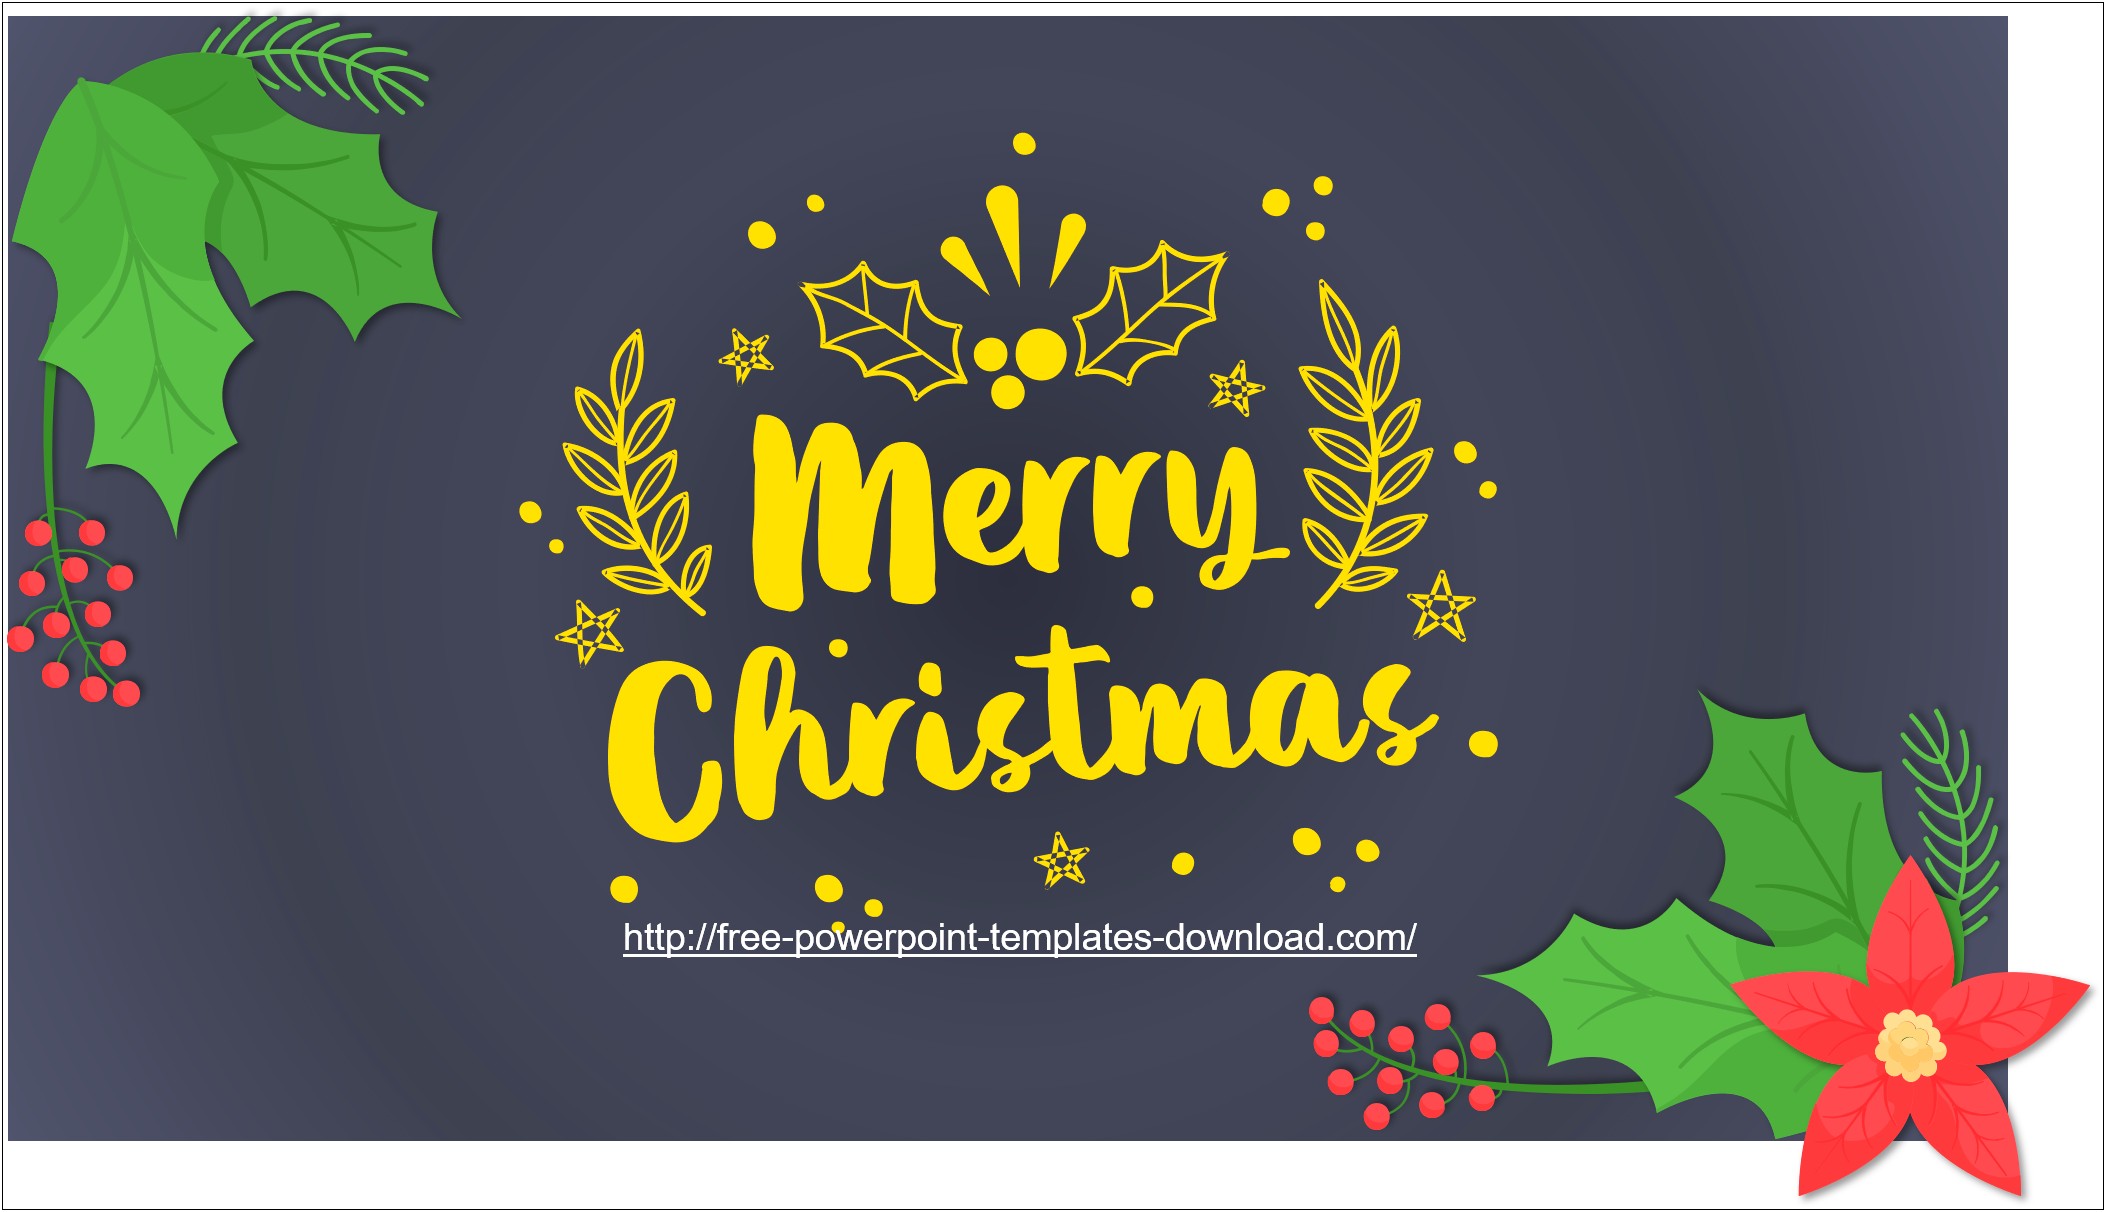 Free Animated Christmas Powerpoint Templates Free Download